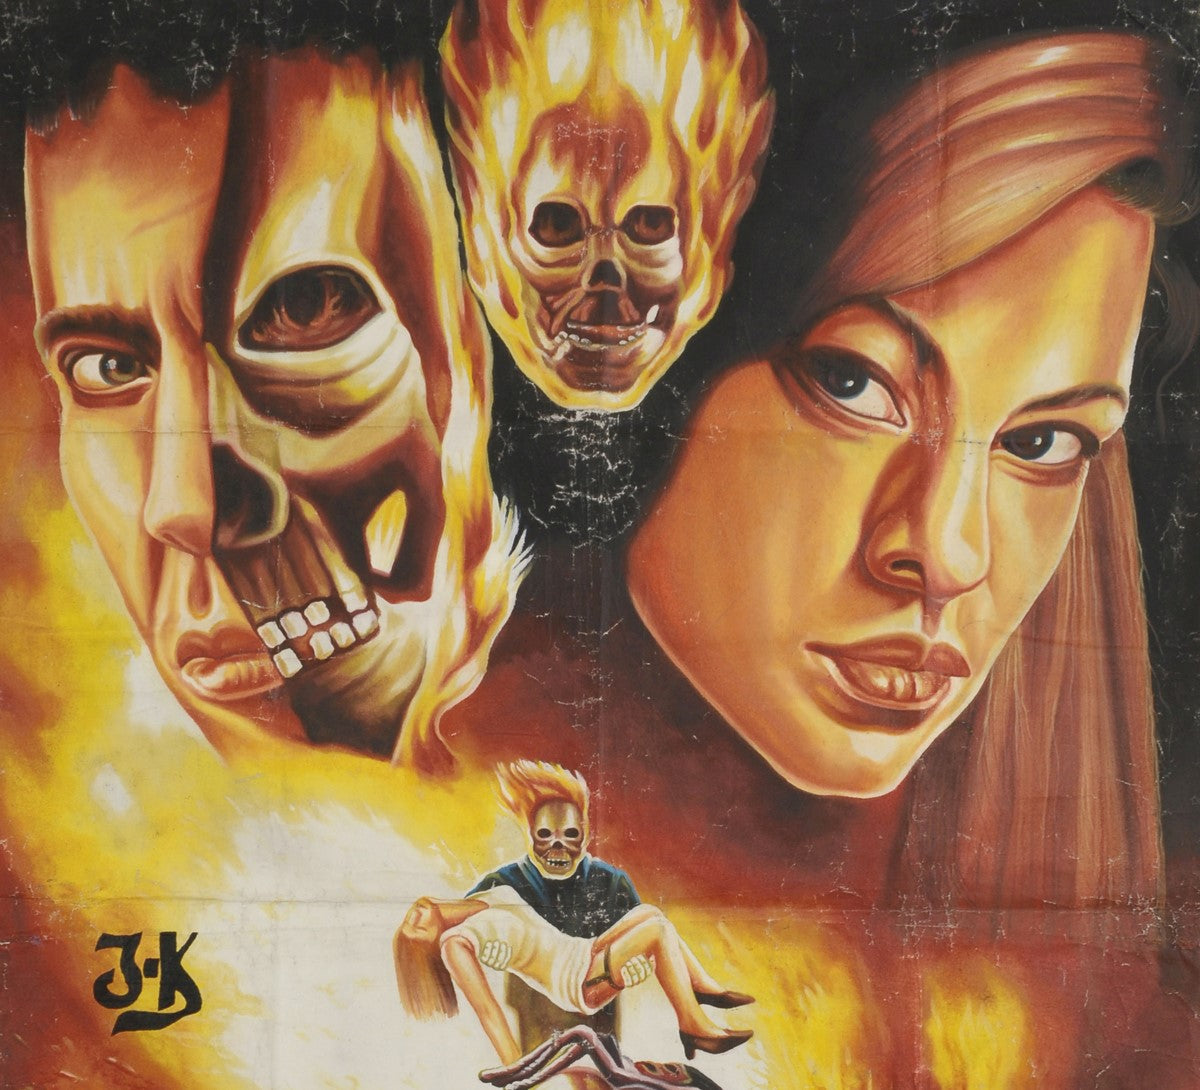 Ghost Rider movie poster hand painted in Ghana for the local cinema actor Nicolas Cage details